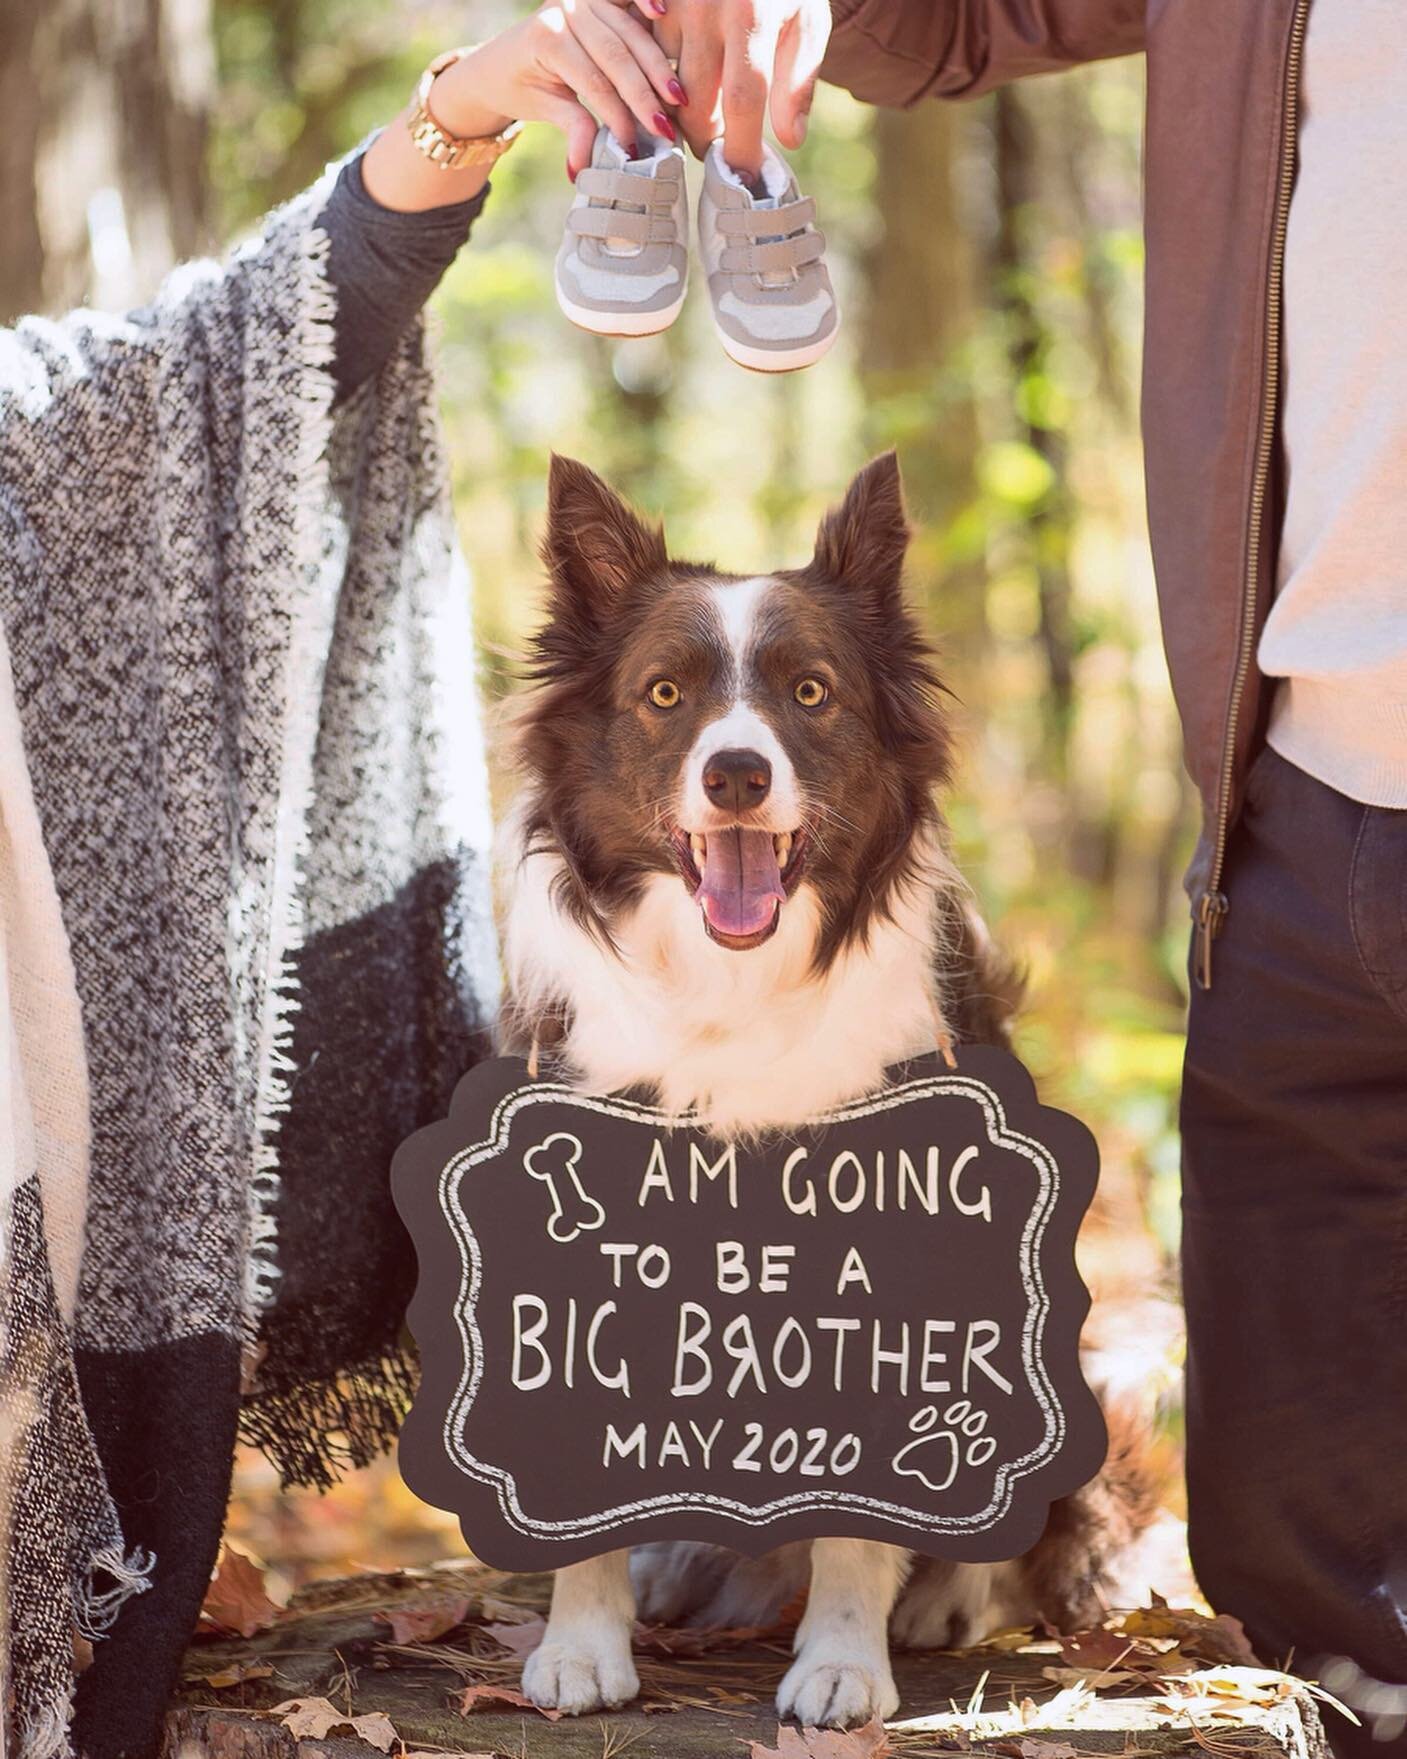 The CUTEST big brother ever! Soooooo happy I was able to photograph this amazing announcement &amp; even more excited to meet baby K in May! Congratulations @_nail.queen_ lovelovelove u💛🐶👶🏼💓💫
.
.
.
.
.
.

#birthannouncement #nailqueen #bigbroth